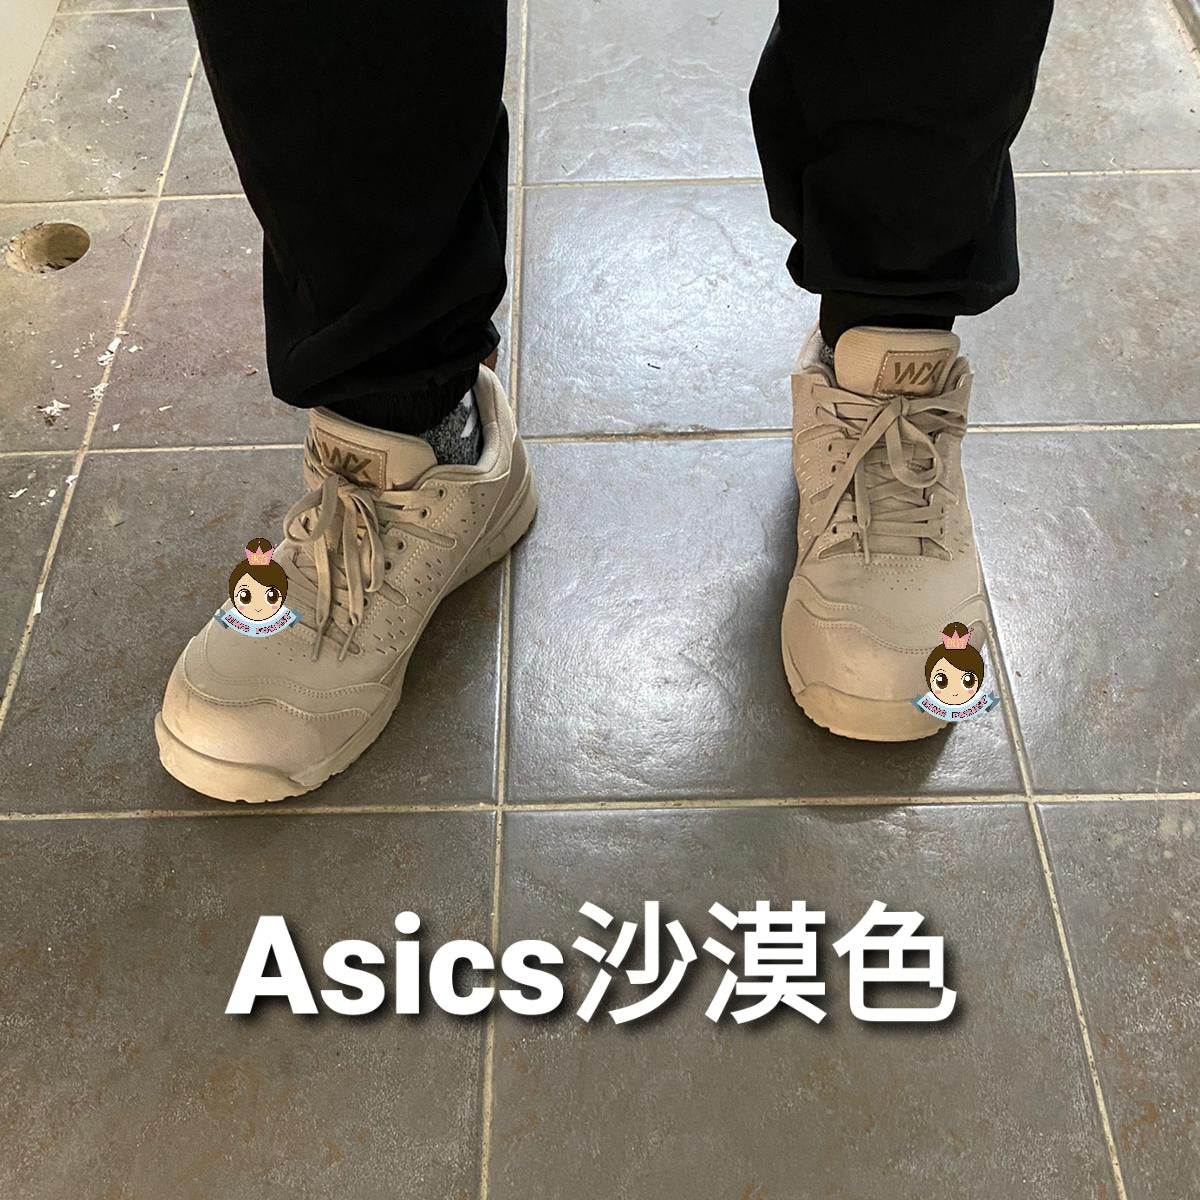 🎌Japan🎌 【In stock▪️Ship immediately】ASICS WX Camouflage Desert Color Safety Shoes EU42.5 US9 26.5cm